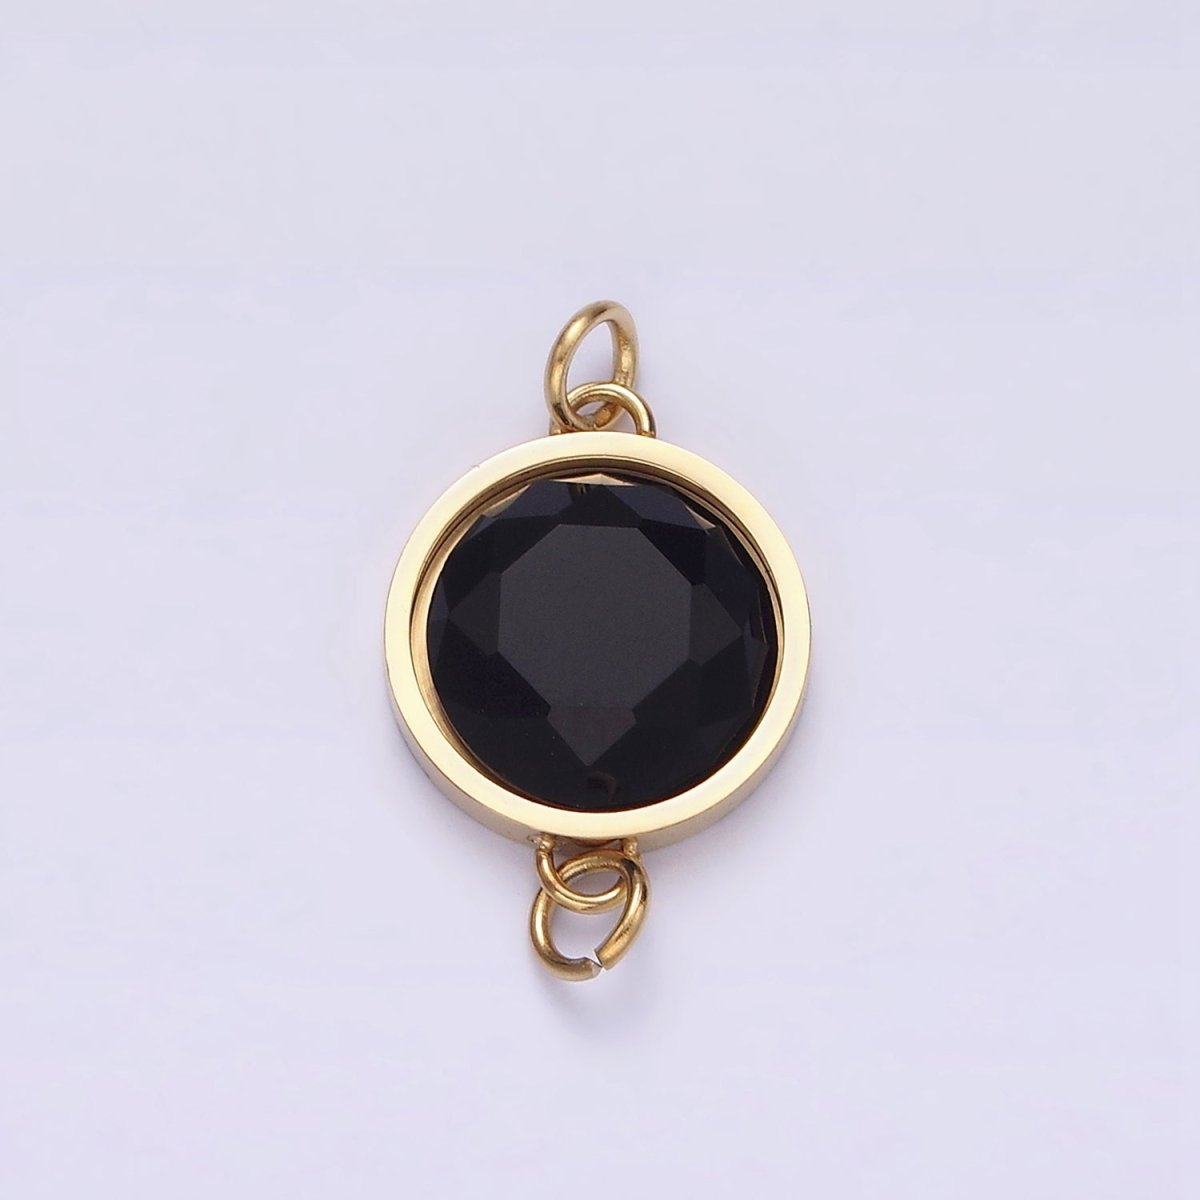 Stainless Steel Charm Connector Black Onyx, Blue Lapiz Multifaceted Round Bezel Link Connector | G713 G714 - DLUXCA